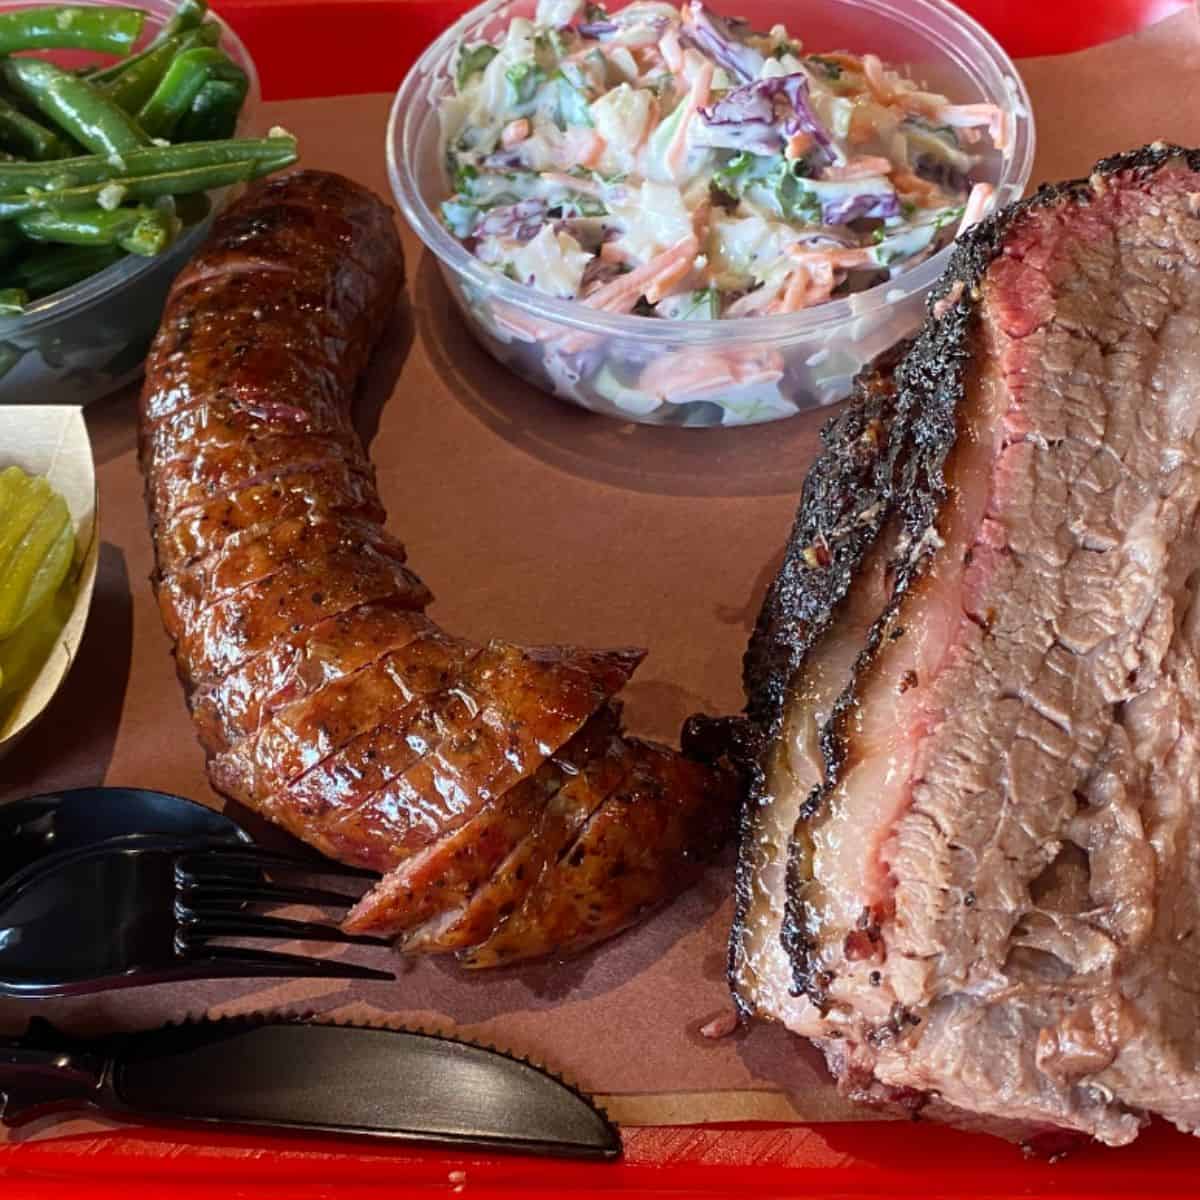 Sausage and Brisket with vegetable sides from Terry Black's BBQ in Austin. 